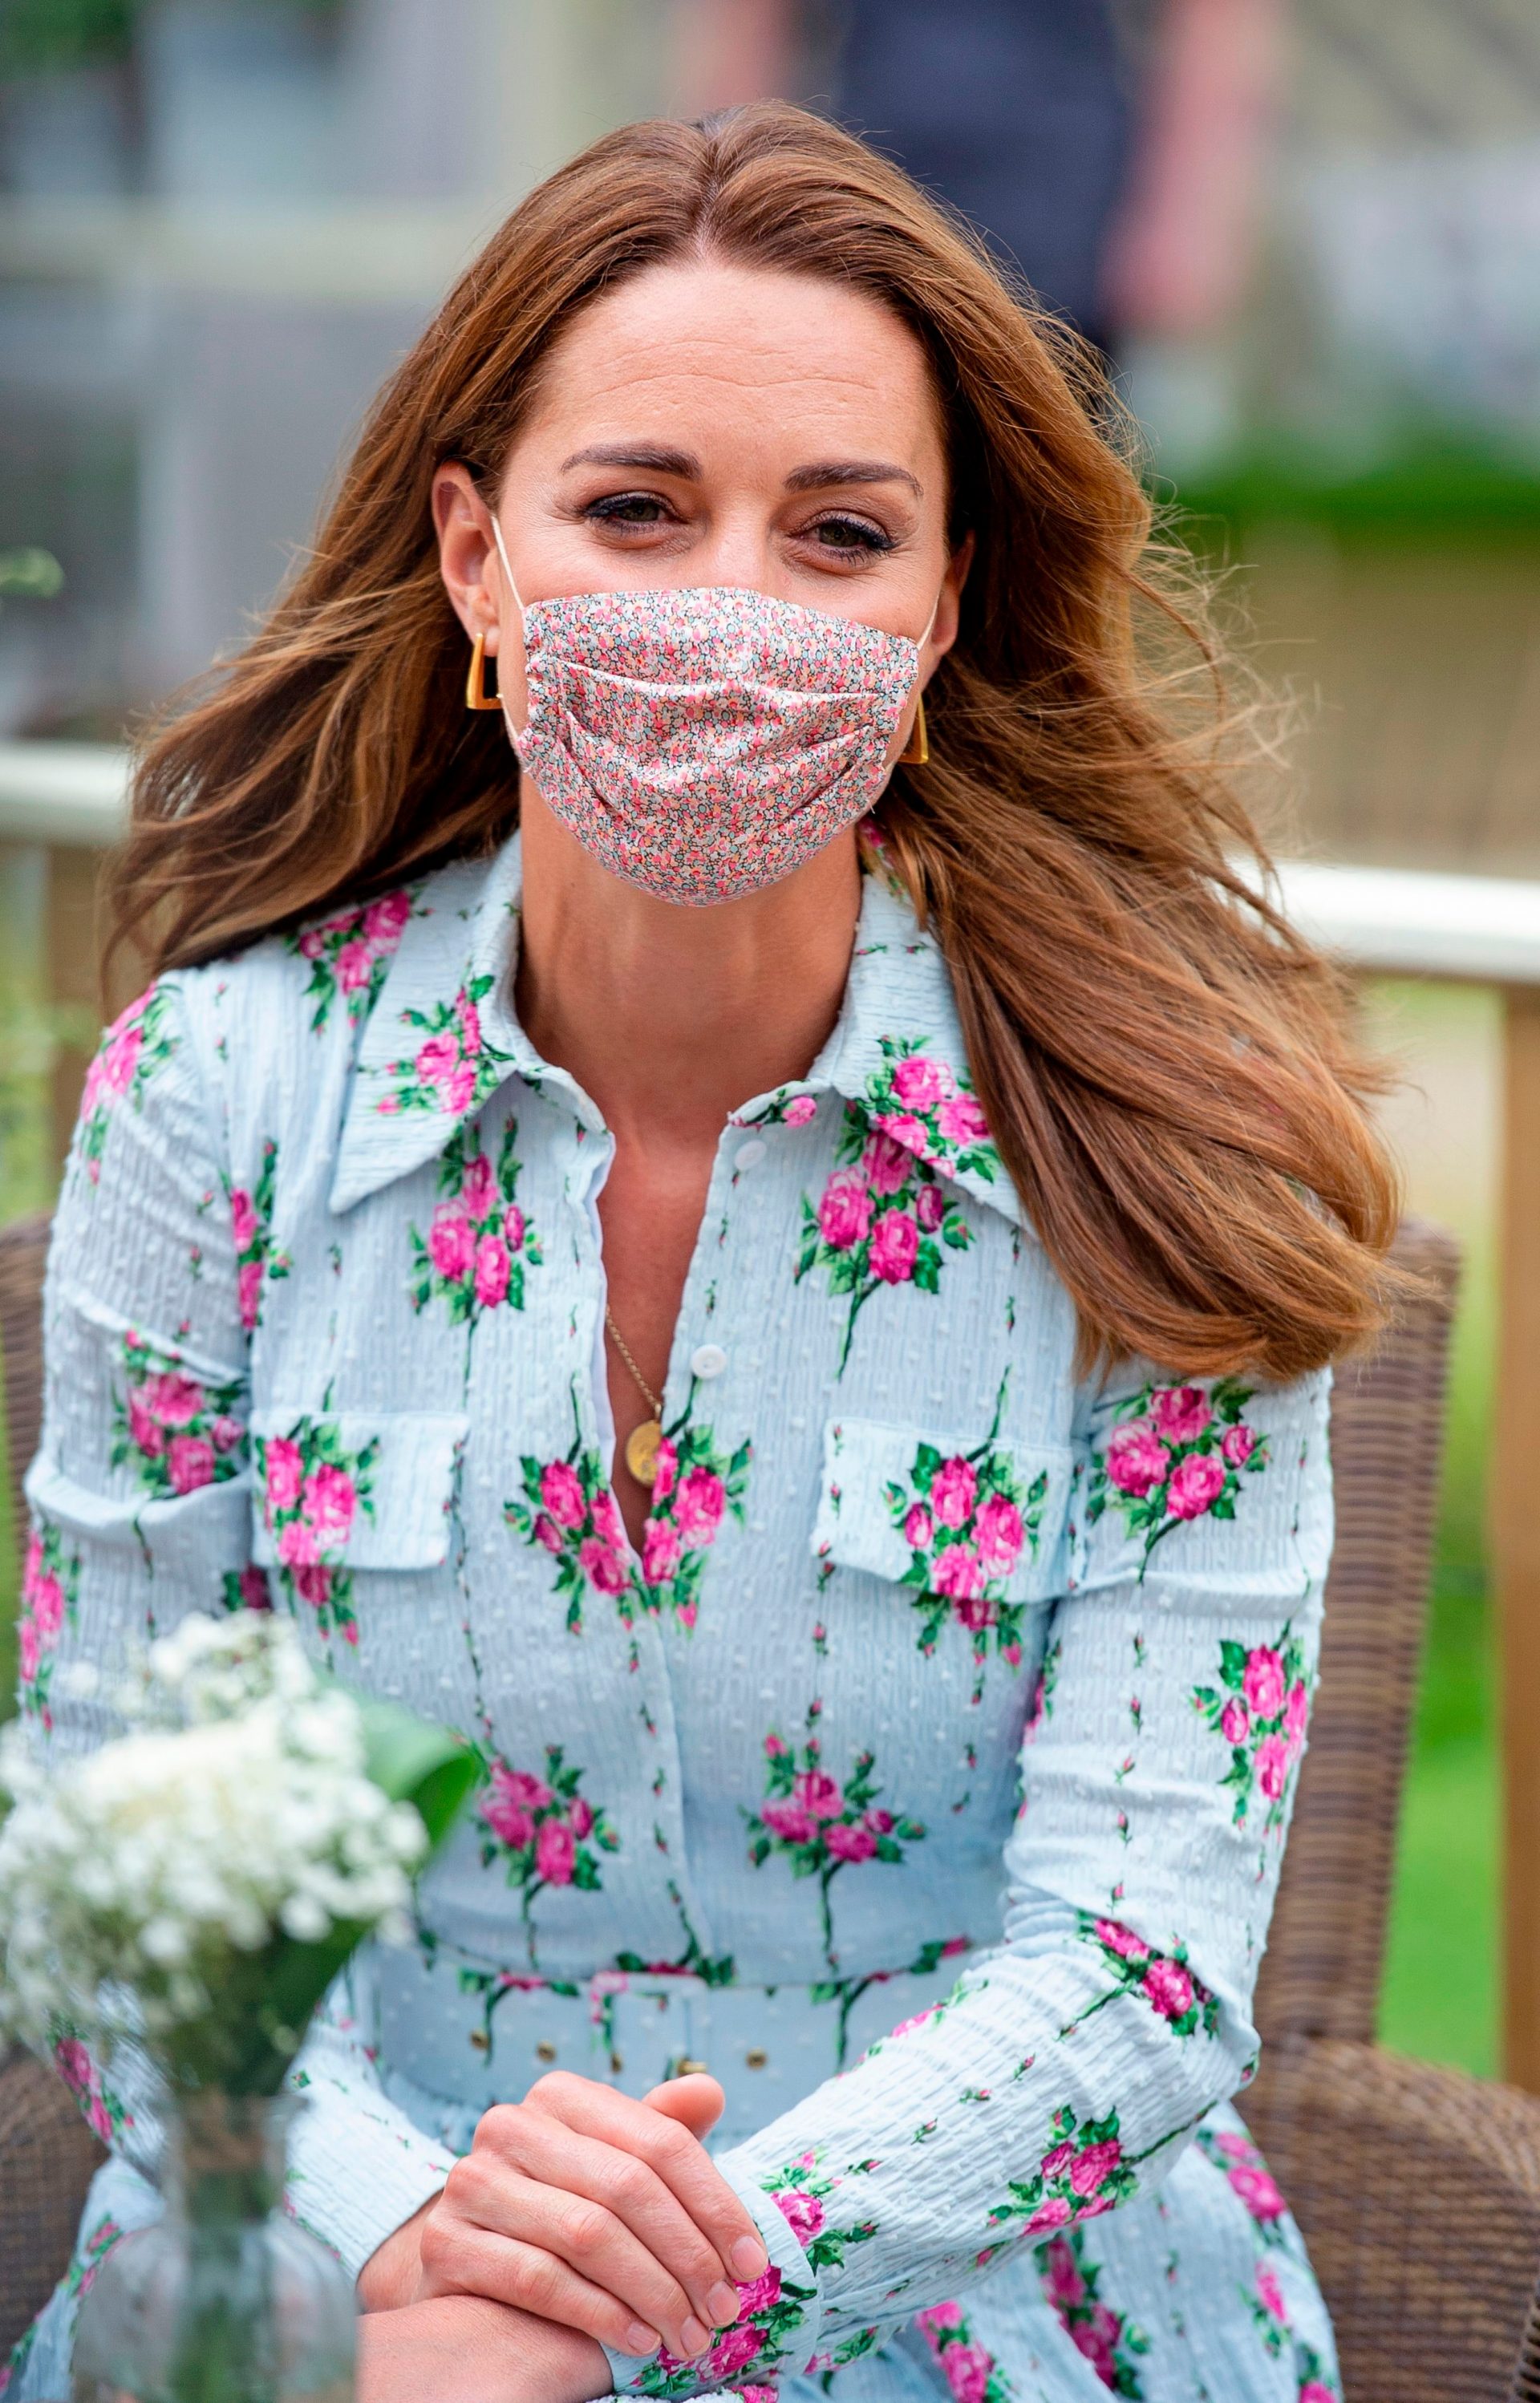 Kate Middleton Face Camouflage: We Discovered the Staunch Floral Face Camouflage Ancient by the Duchess